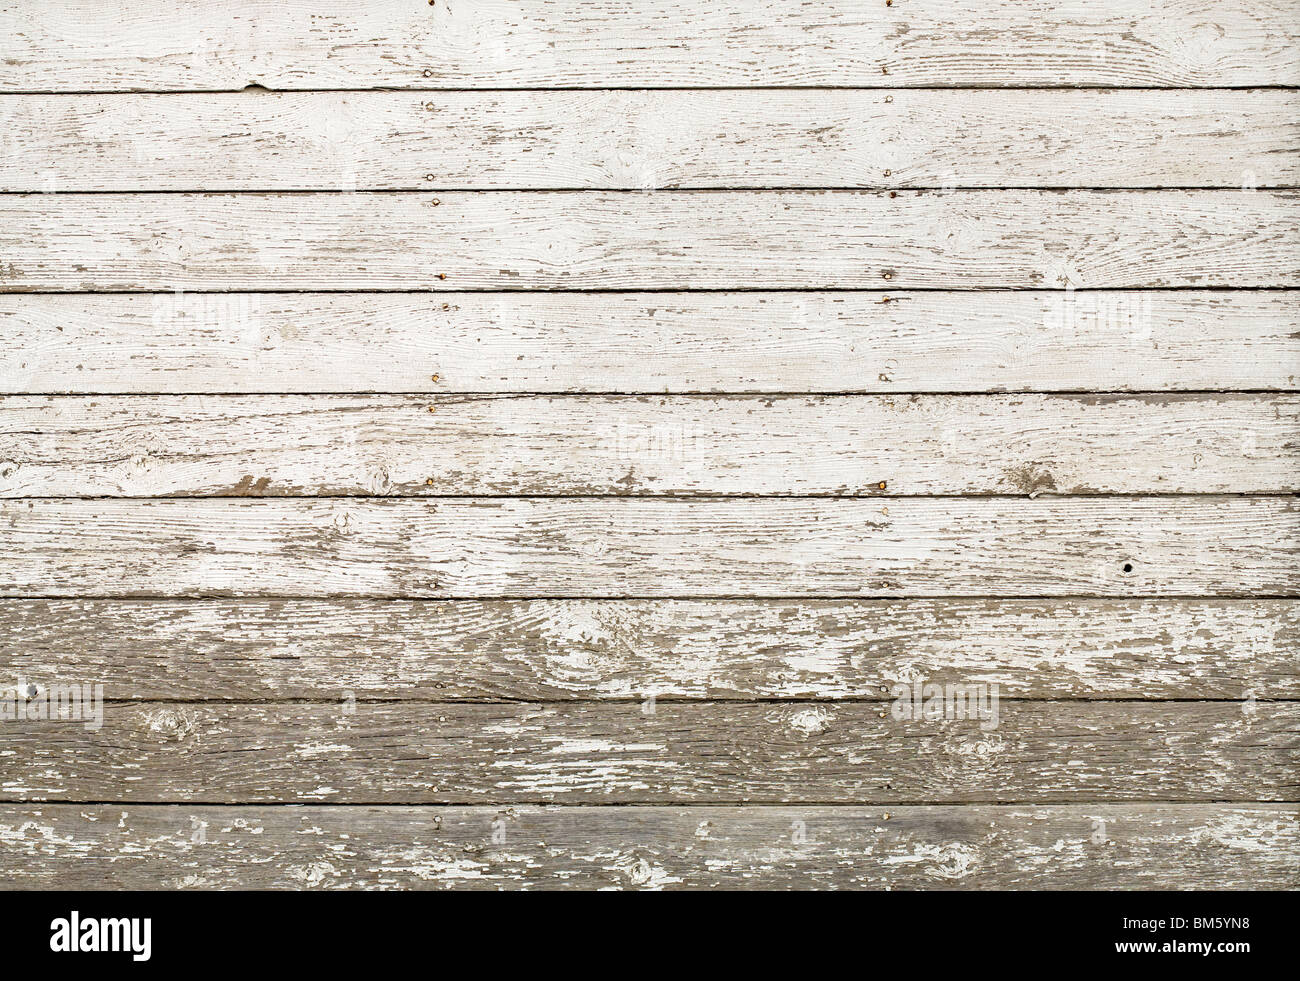 Side of an old white barn, with paint chipped and peeling, Horizontal planks; image can be made vertical. Stock Photo